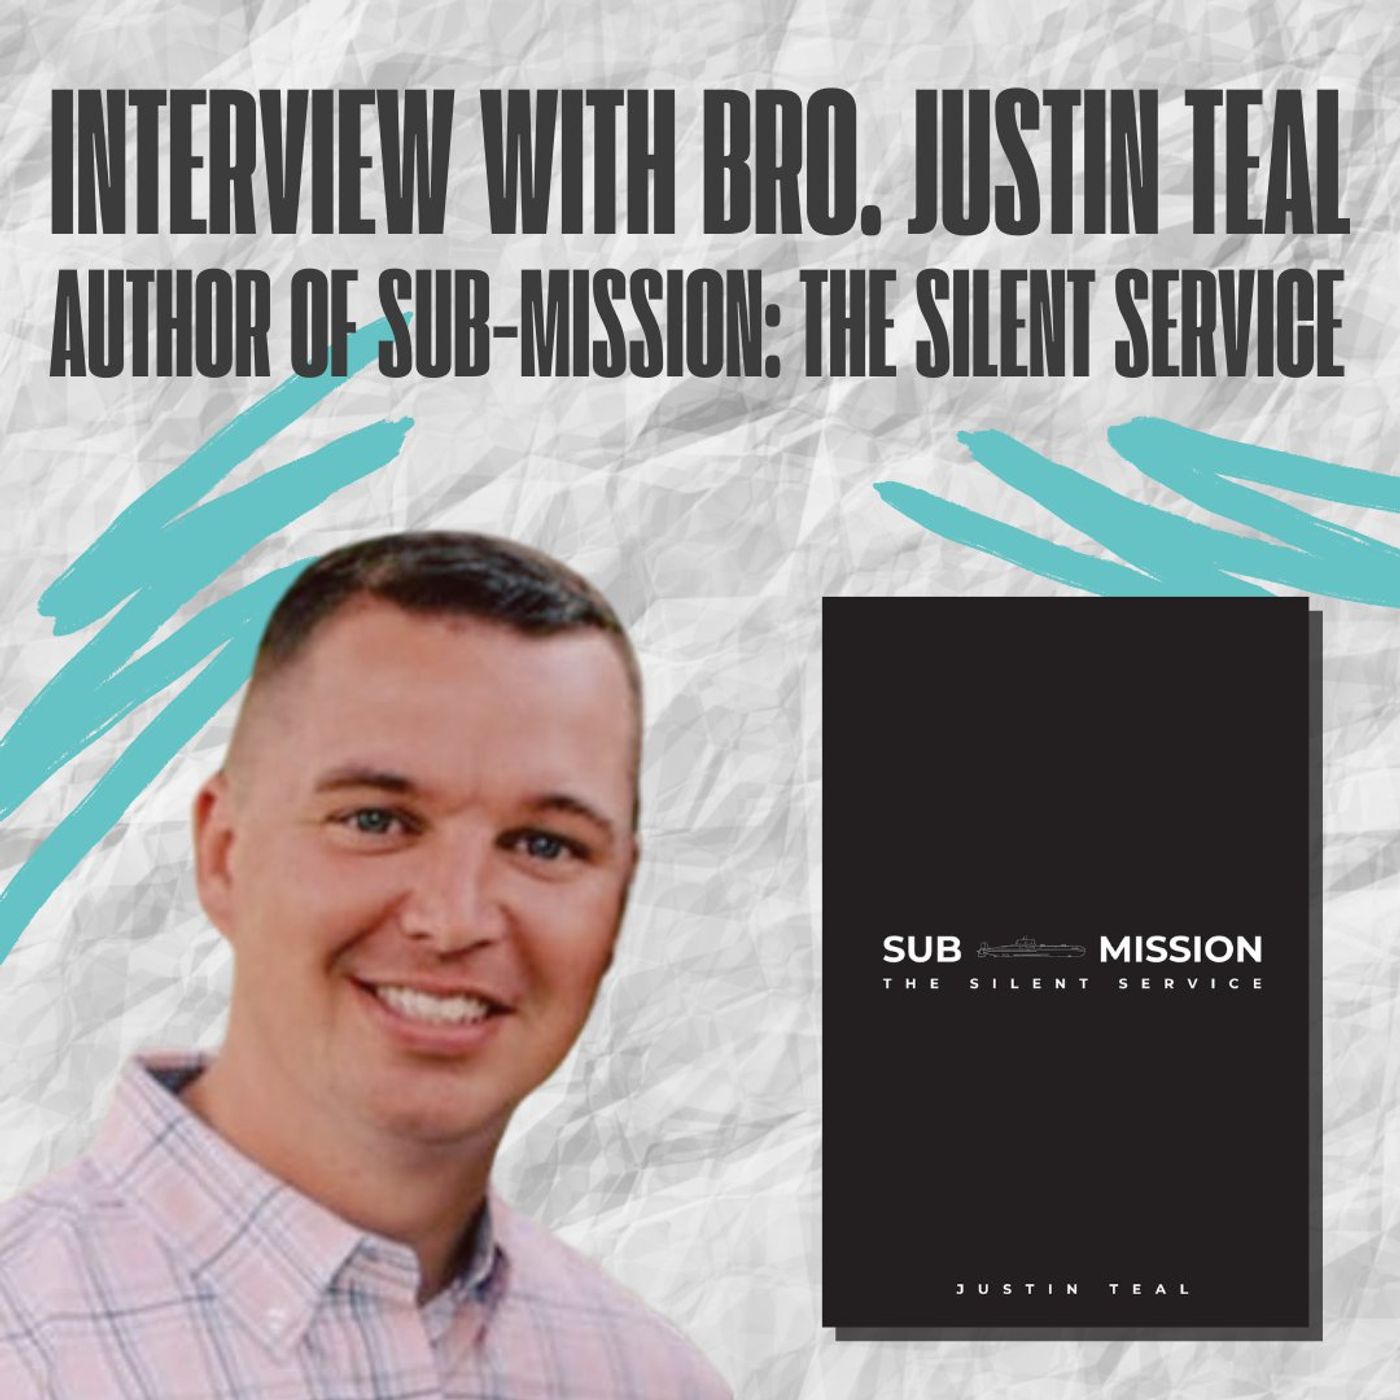 Interview with Bro. Justin Teal, Author of Sub-Mission: The Silent Service